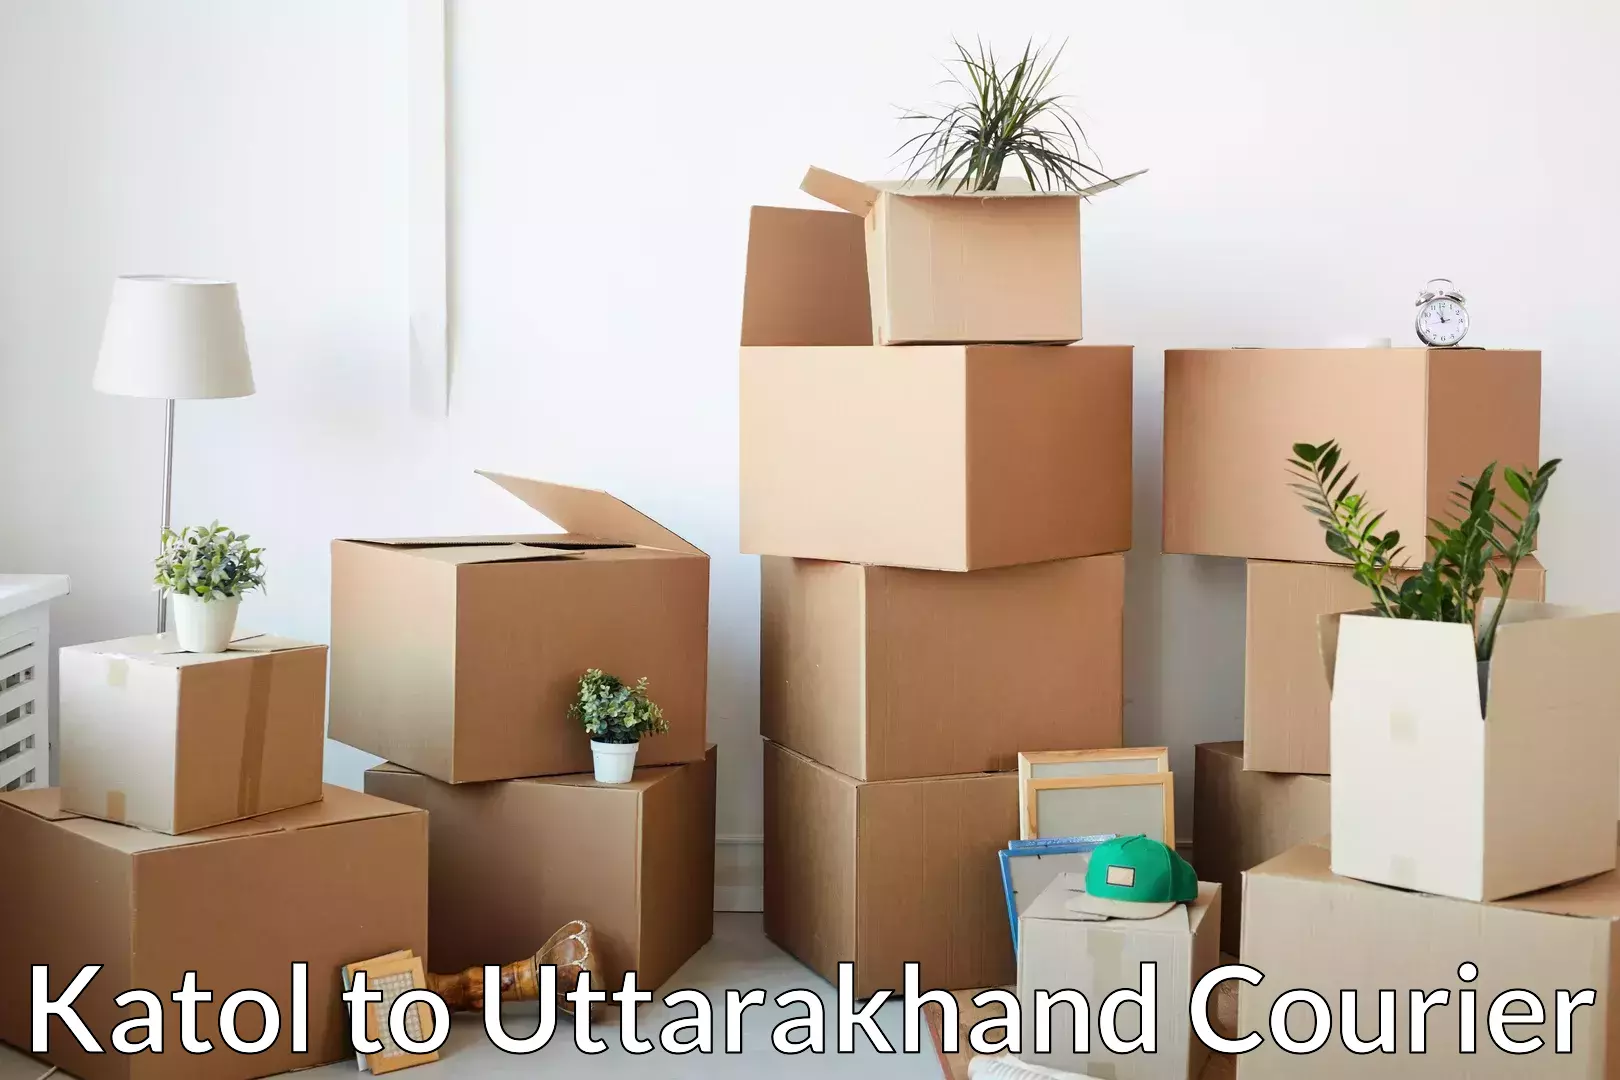 Cost-effective moving options in Katol to Rishikesh